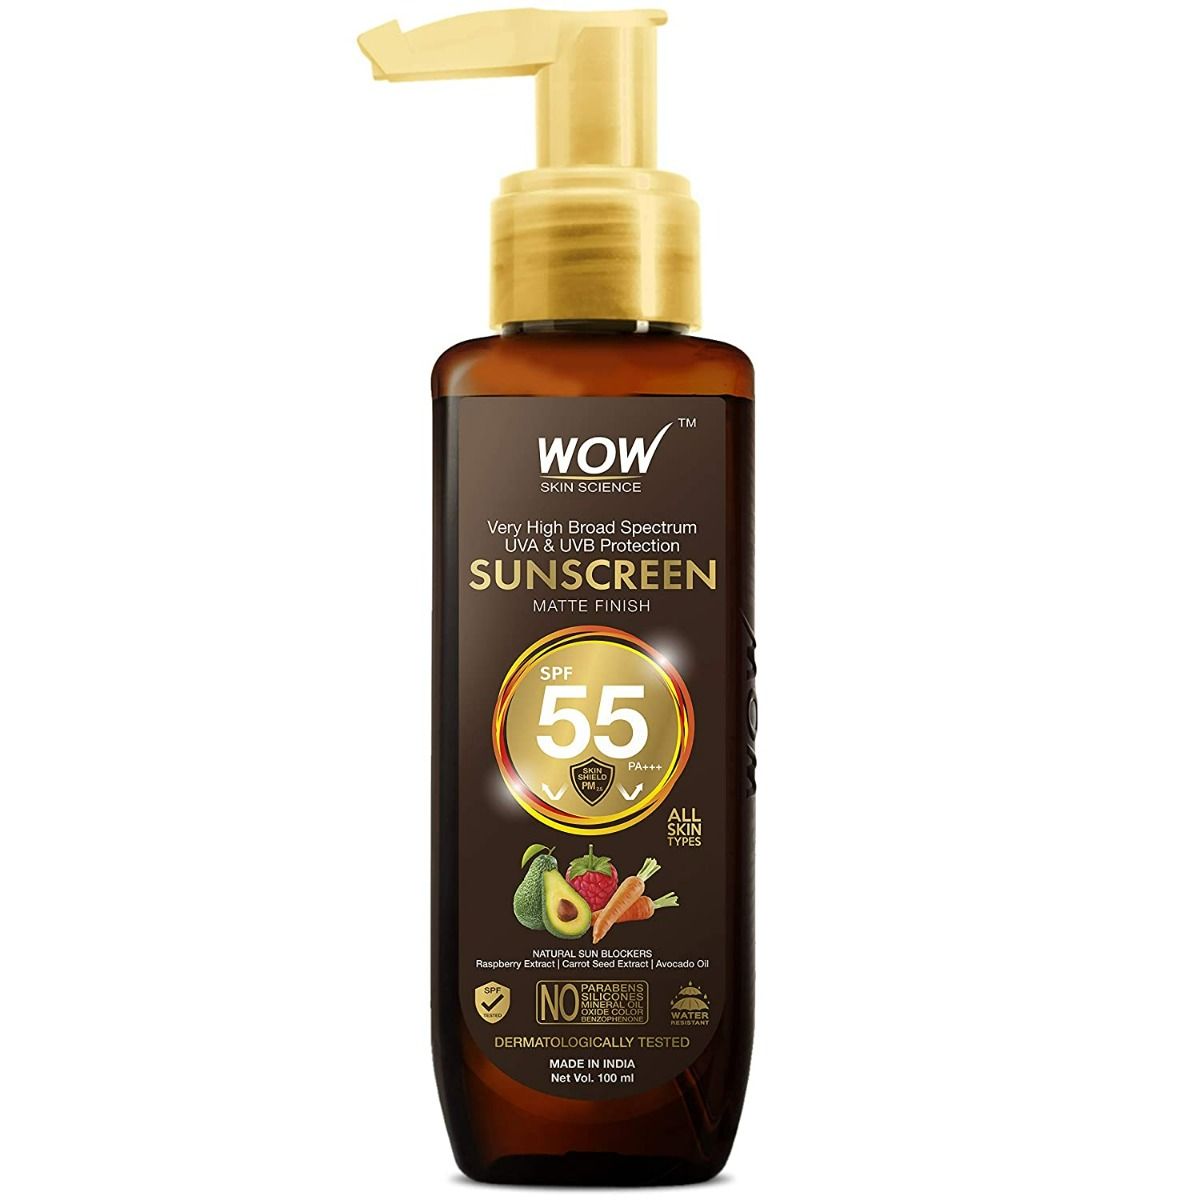 WOW Skin Science Matte Finish SPF 55 PA+++ Sunscreen, 100 ml, Pack of 1 